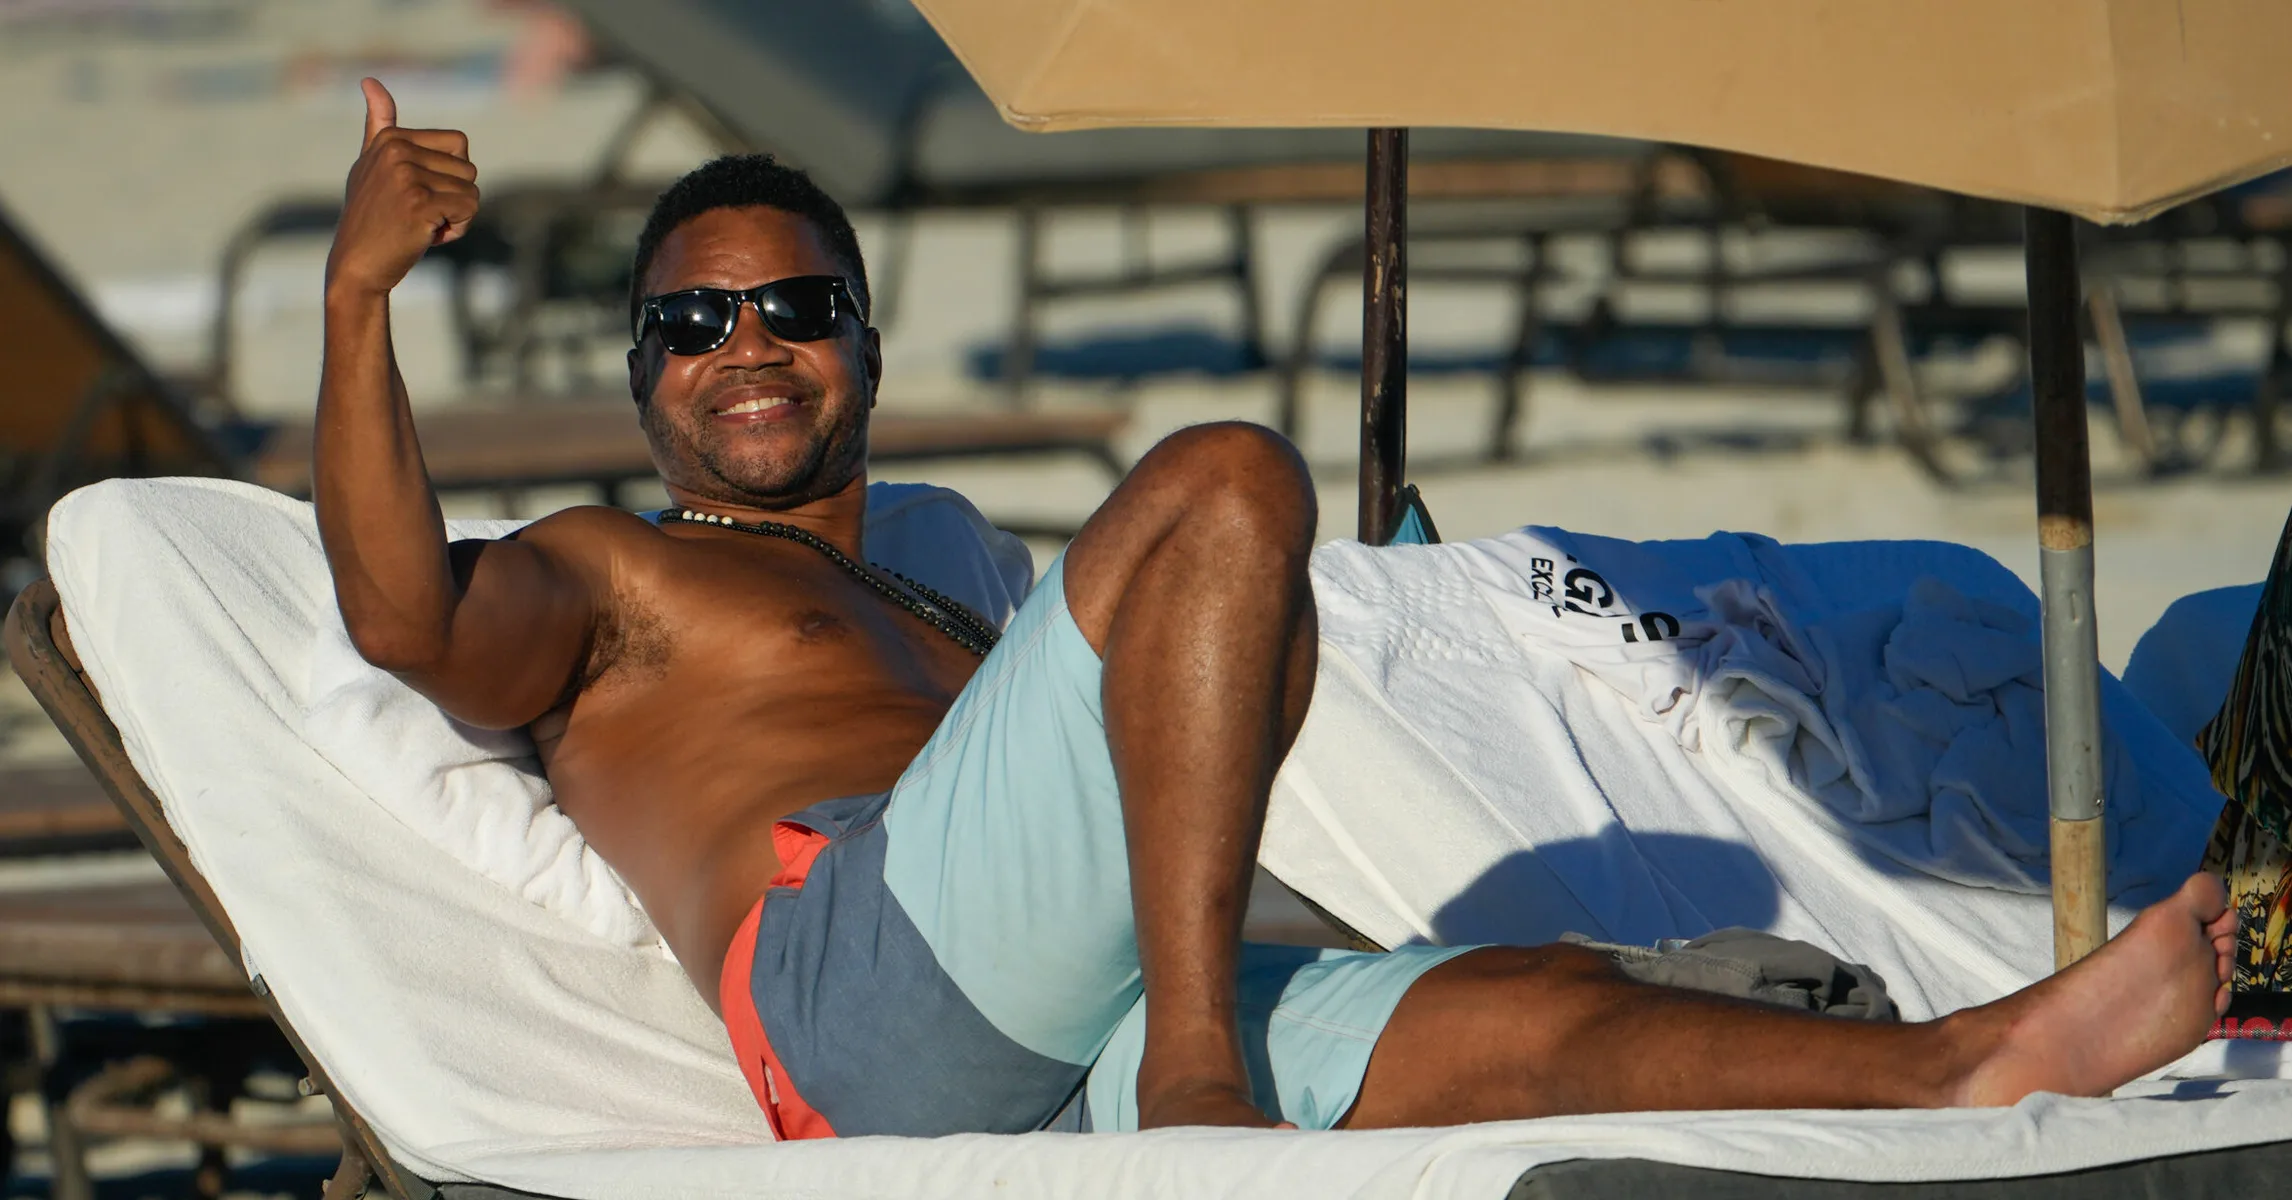 Cuba Gooding Jr. Spotted In Miami Amid Lil Rod's Diddy Lawsuit